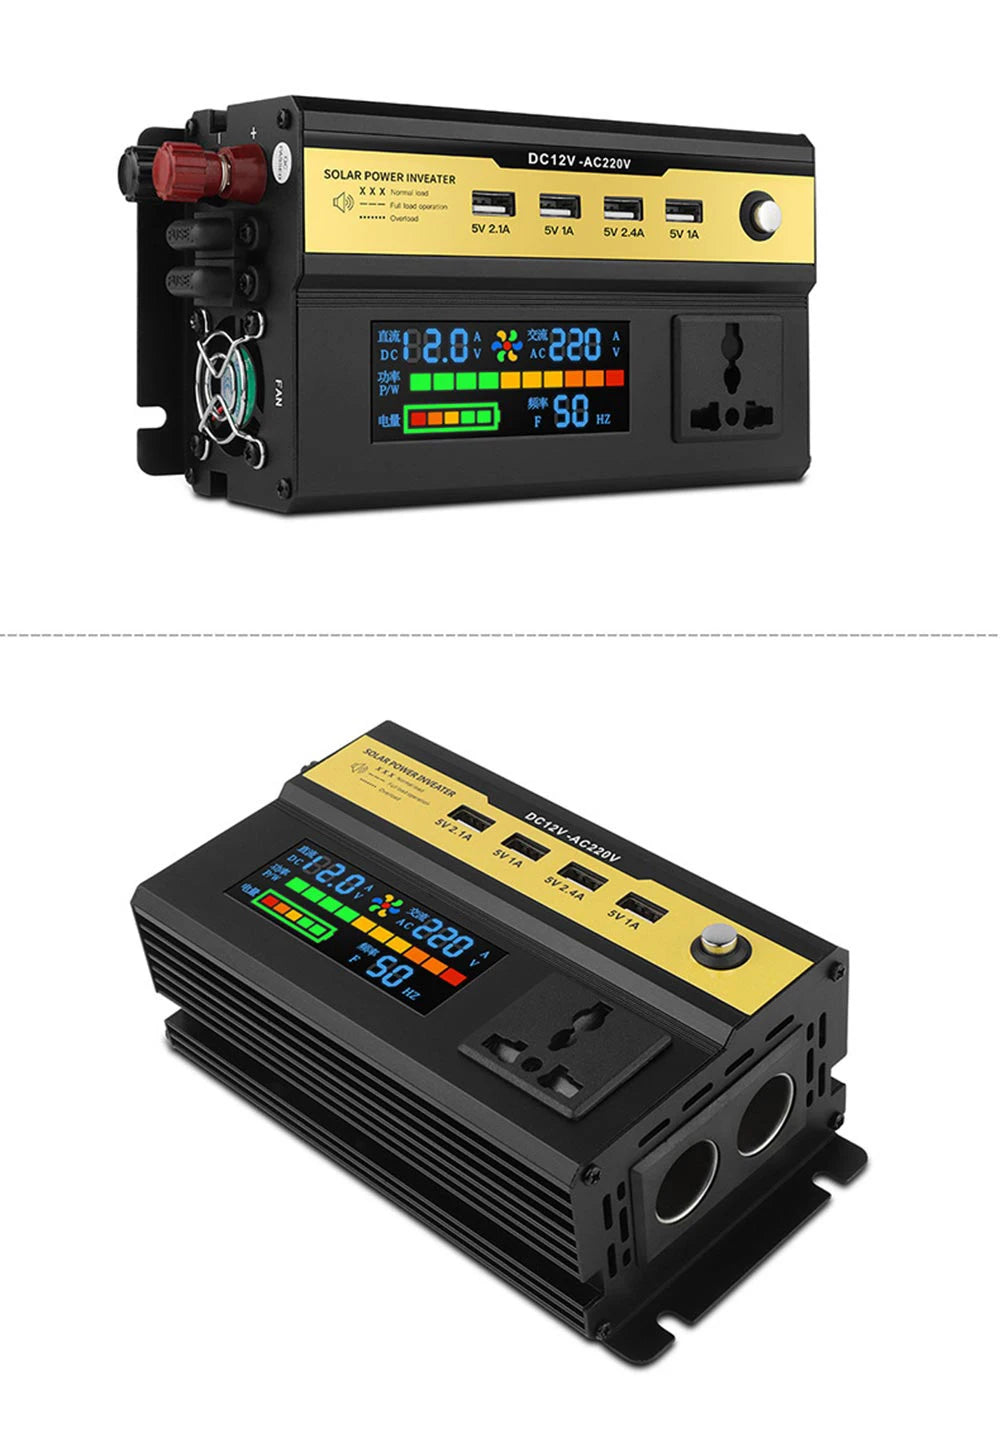 Pure Sine Wave Inverter, DC/AC, 12V to 220V, 3000W to 6000W, USB charger, solar car inverter specifications.